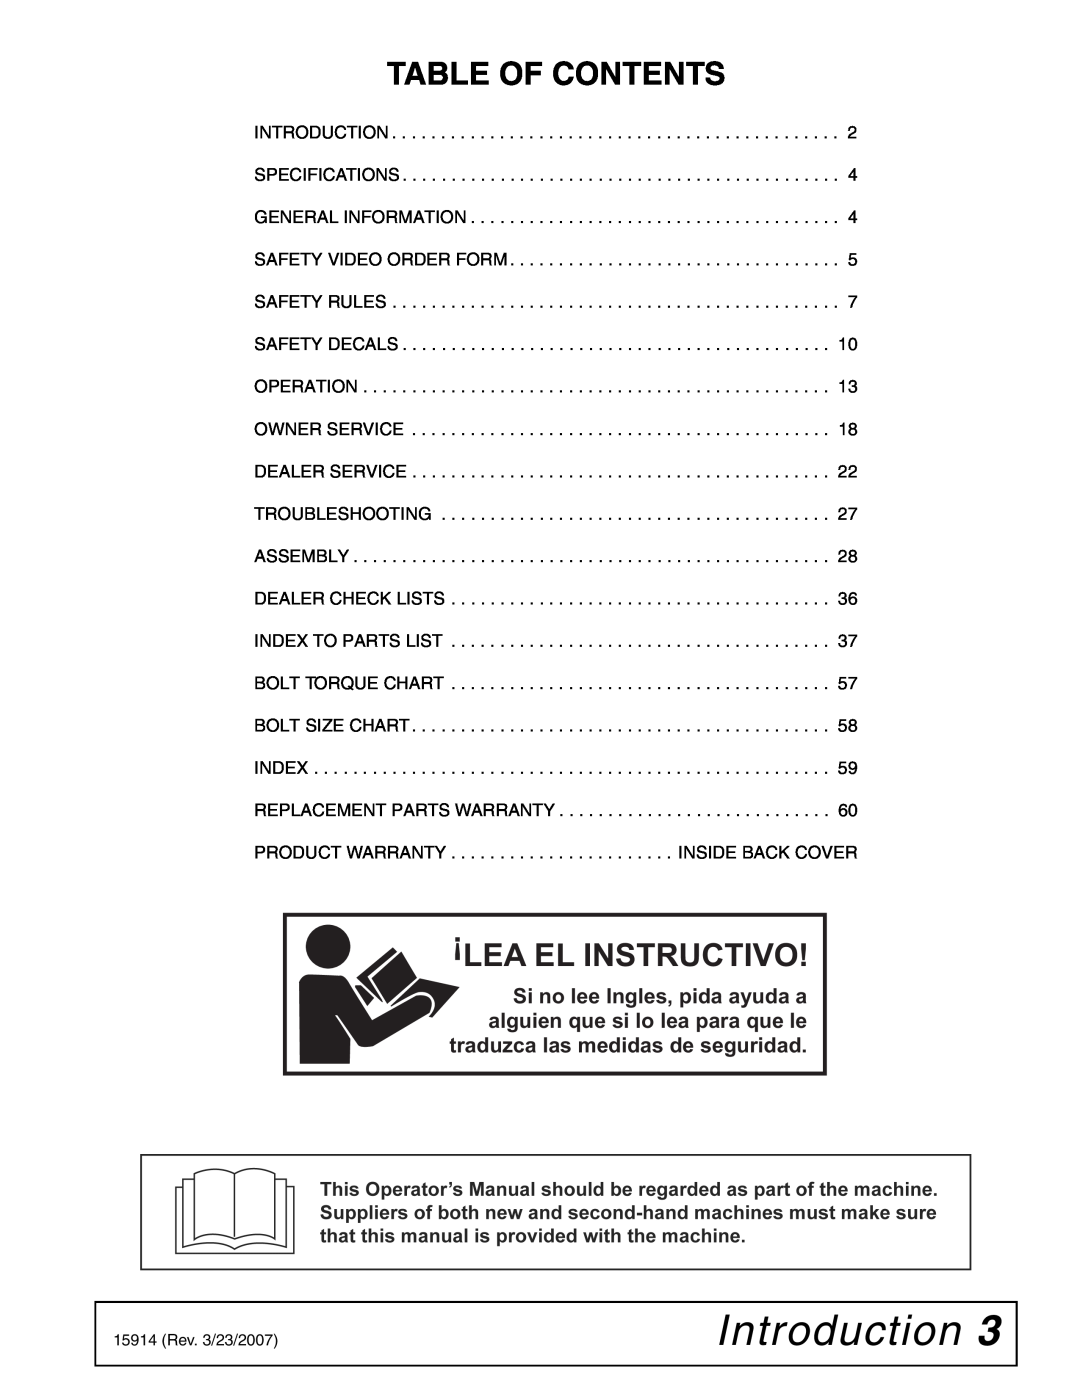 Woods Equipment MD80-2 manual Introduction, Table Of Contents, Lea El Instructivo 